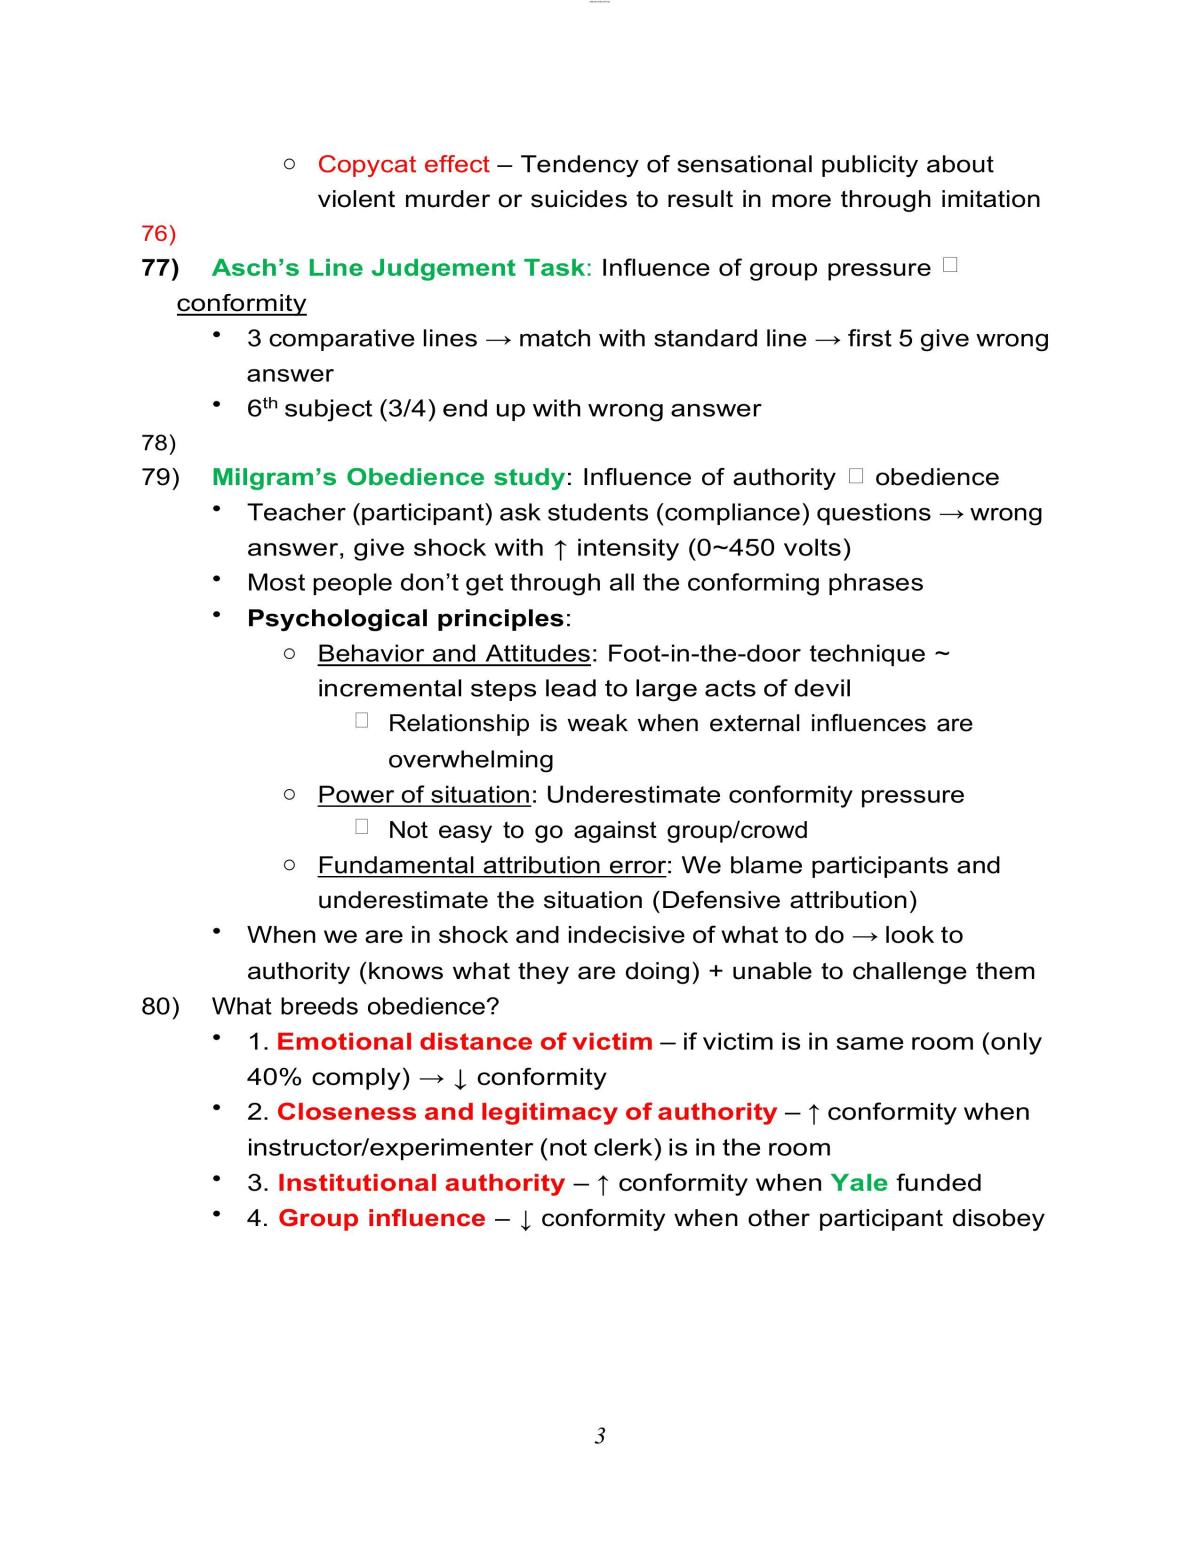 Introduction to Social Psychology Summary - Page 23